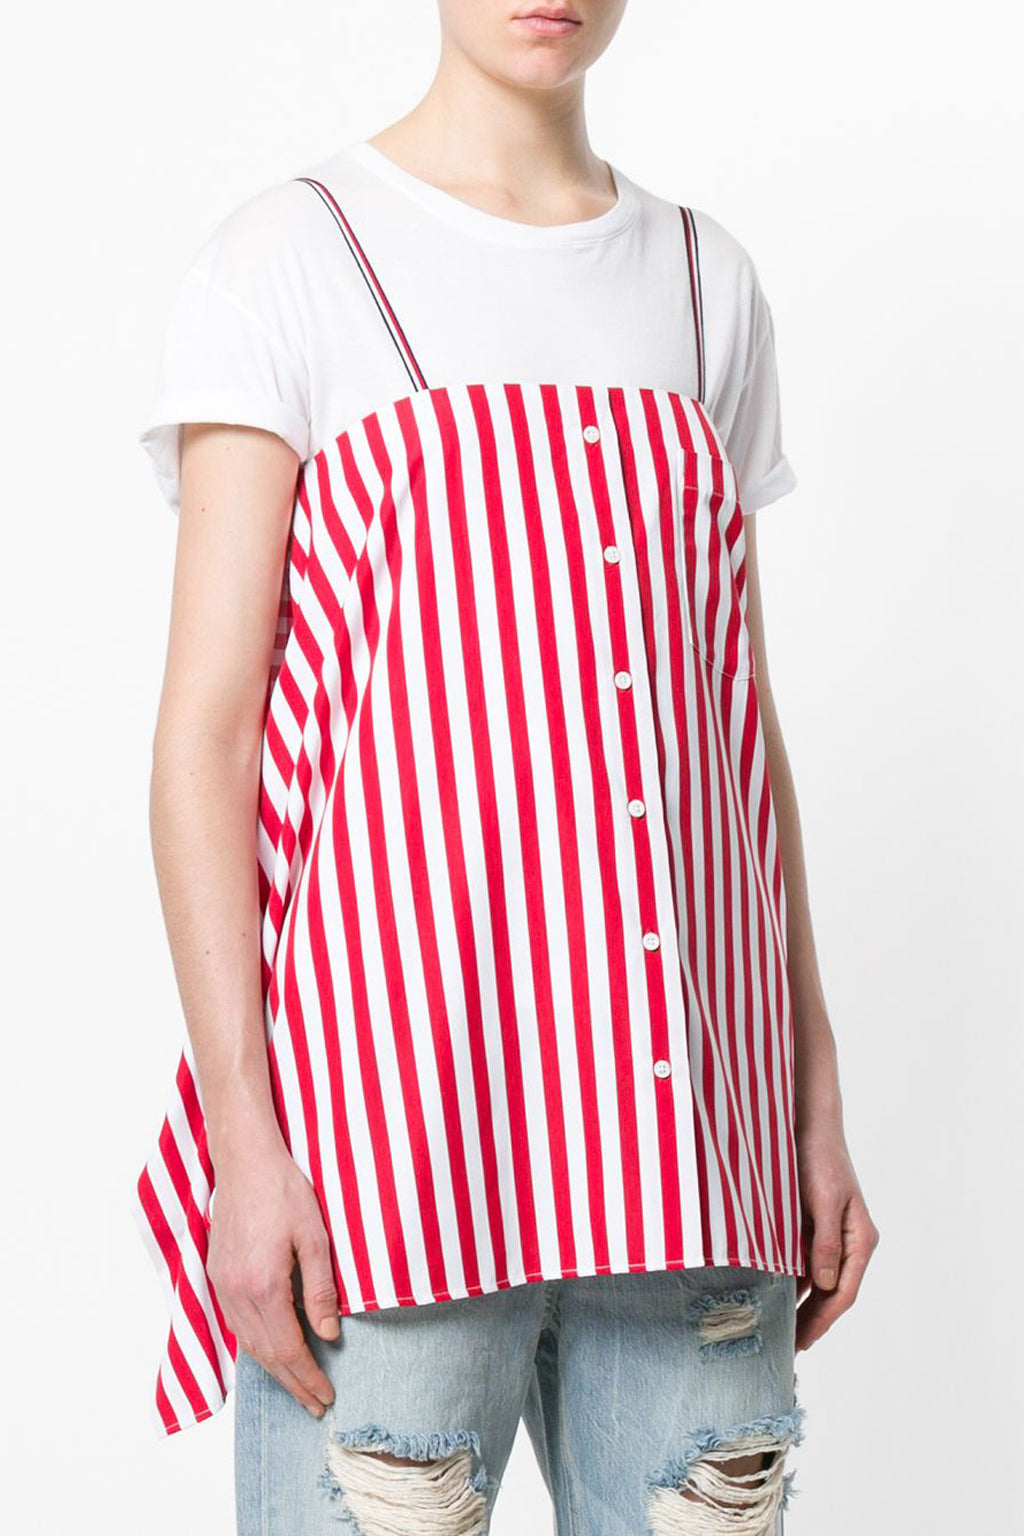 Tommy Hilfiger - Hilfiger Collection Striped Tank Top